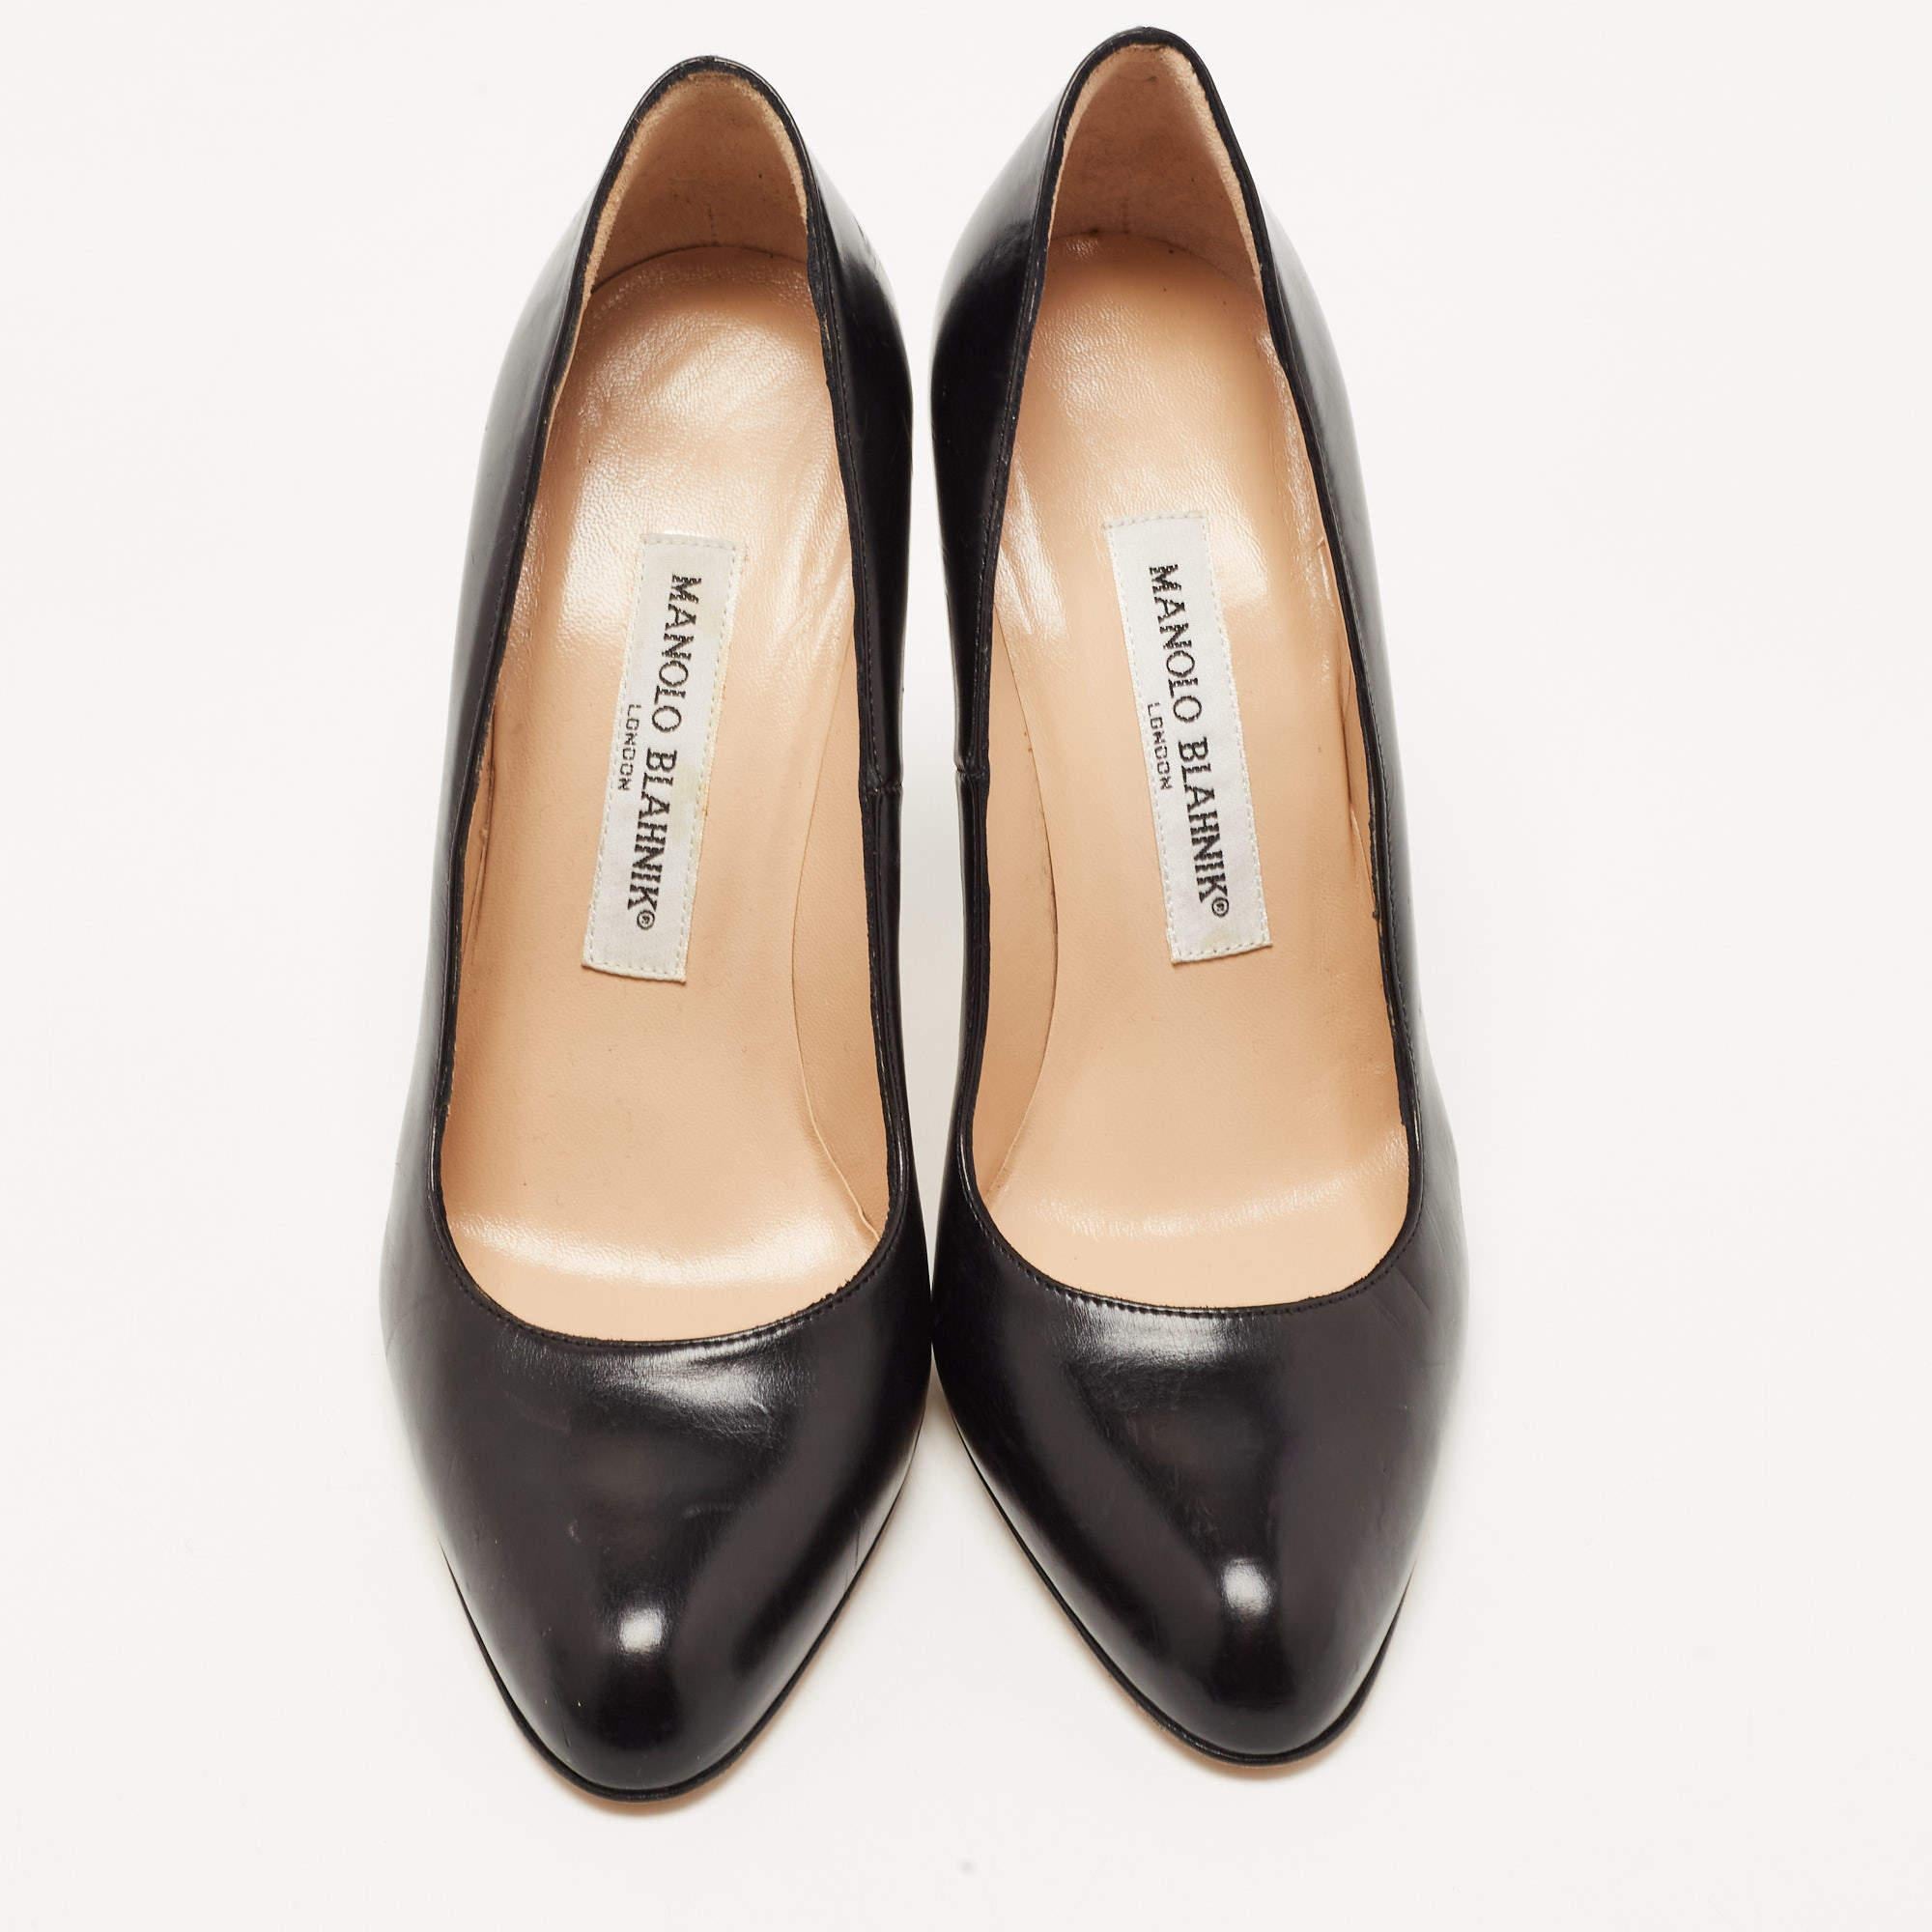 There are some shoes that stand the test of time and fashion cycles, these timeless Manolo Blahnik pumps are classics that will last you season after season. Crafted from leather in a black shade, they are designed with sleek cuts, almond-toes, and